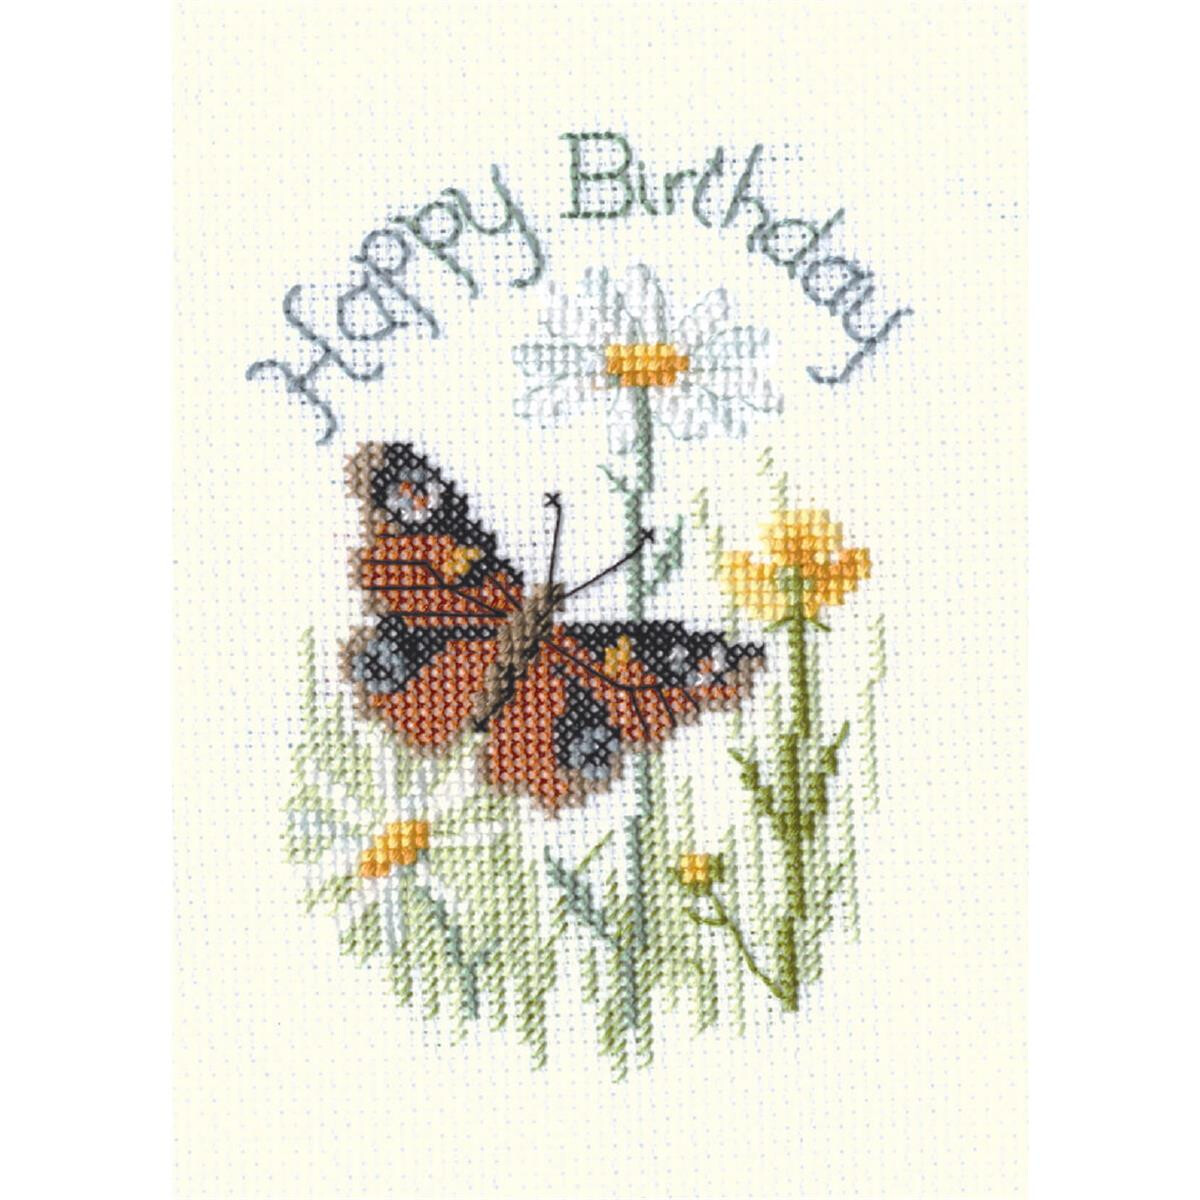 A beautifully crafted embroidery kit from Bothy Threads...